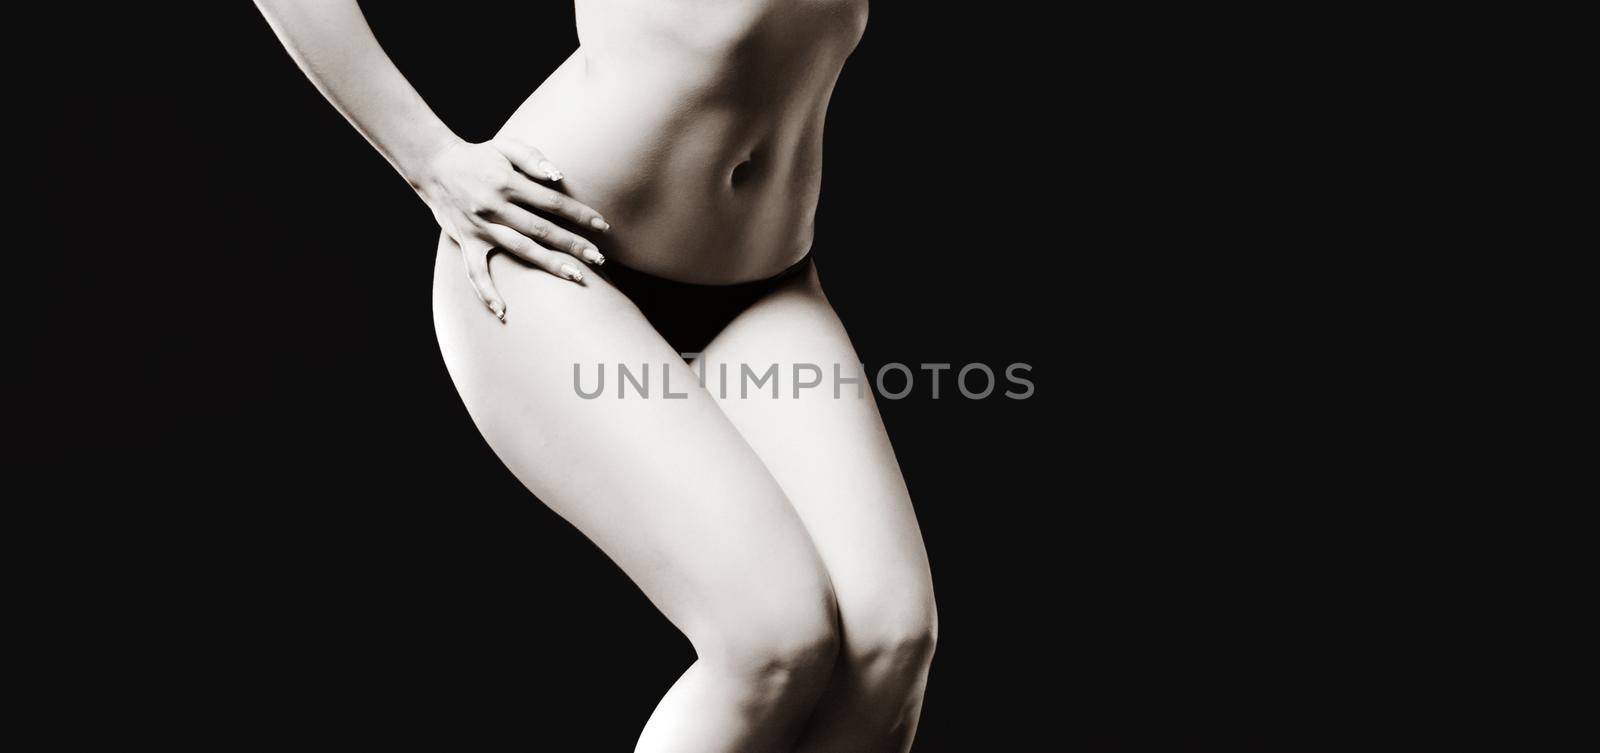 Elegant woman and beauty concept. Half-naked woman posing in the studio. View from the back